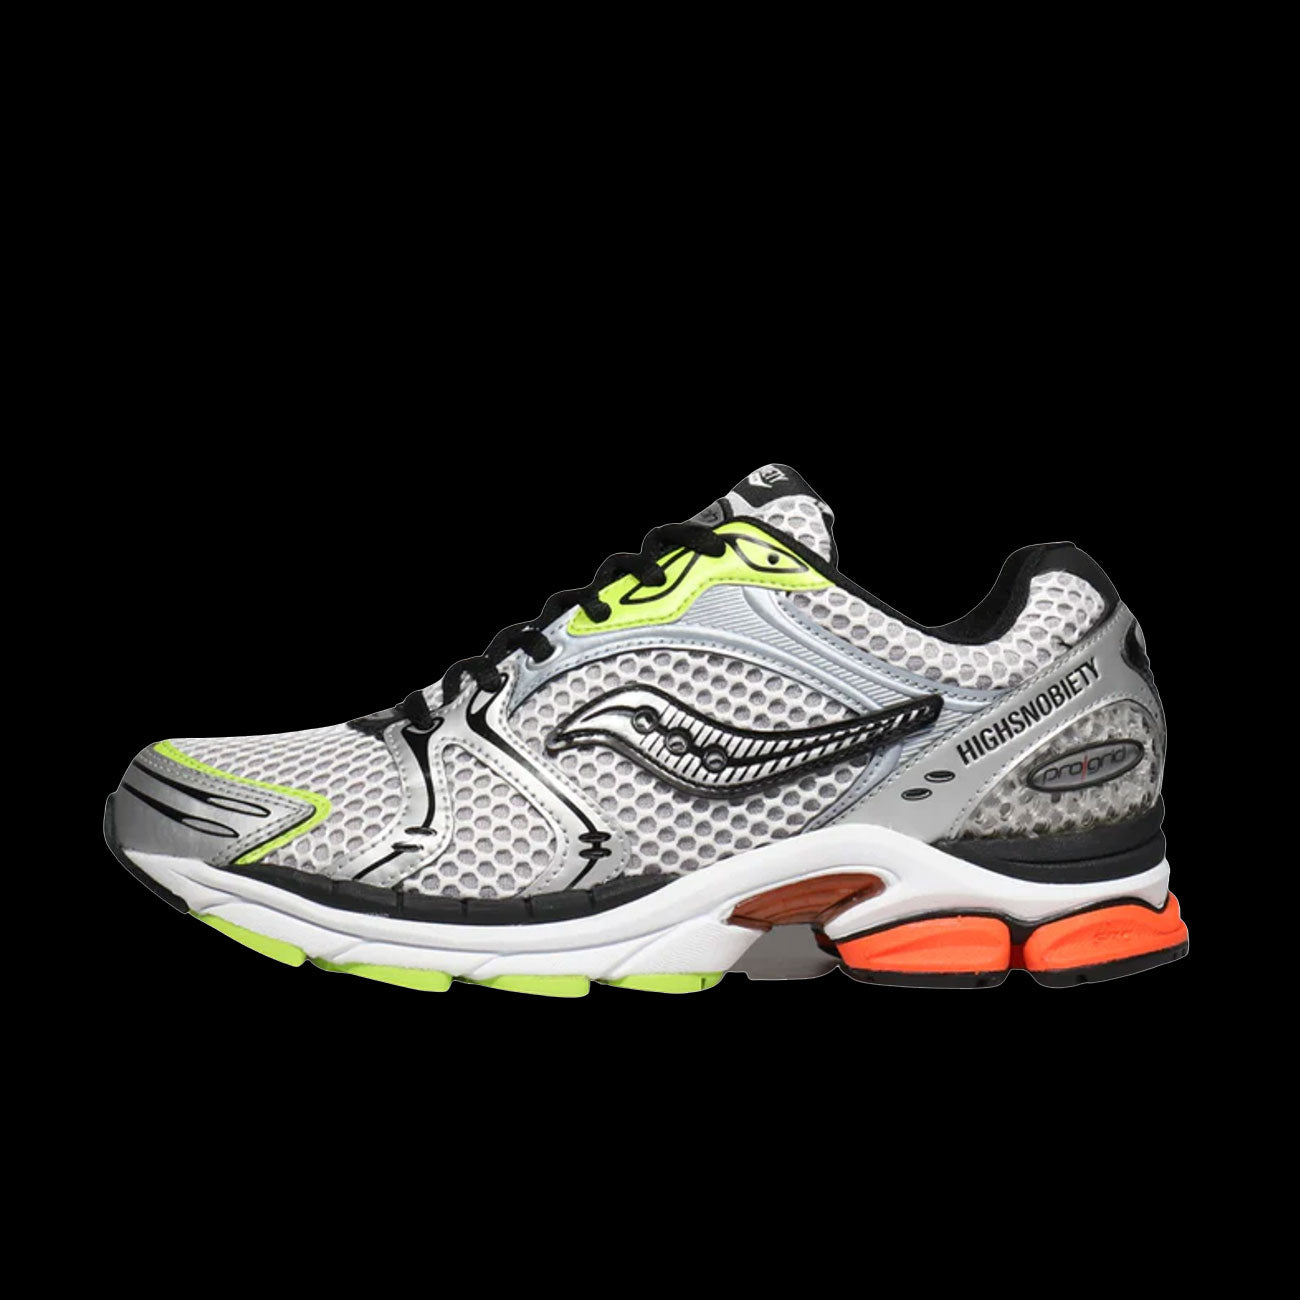 Saucony Shoes – Two 18